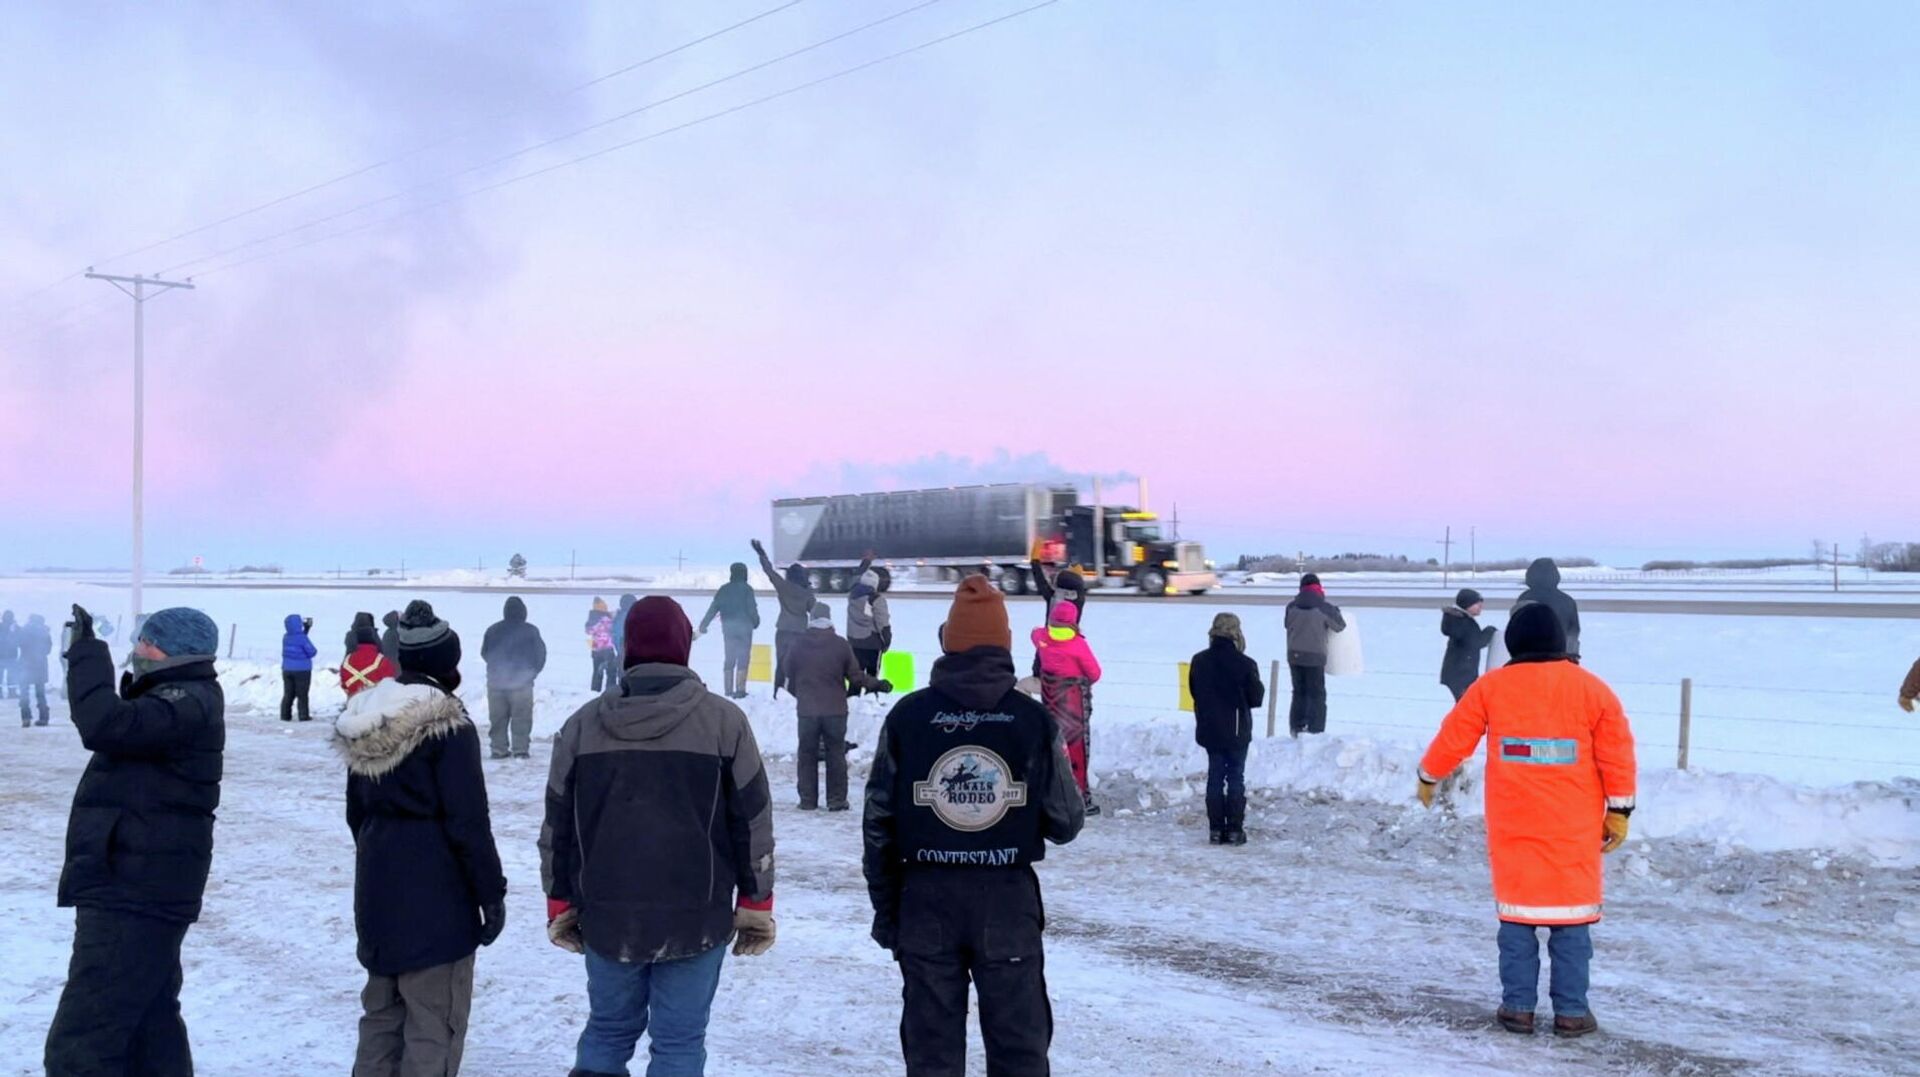 Family, friends and neighbours gather to show support for the freedom convoy on the Trans-Canada highway in Grenfell, Saskatchewan, Canada January 25, 2022 in this screenshot obtained from a video on social media - Sputnik International, 1920, 07.02.2022